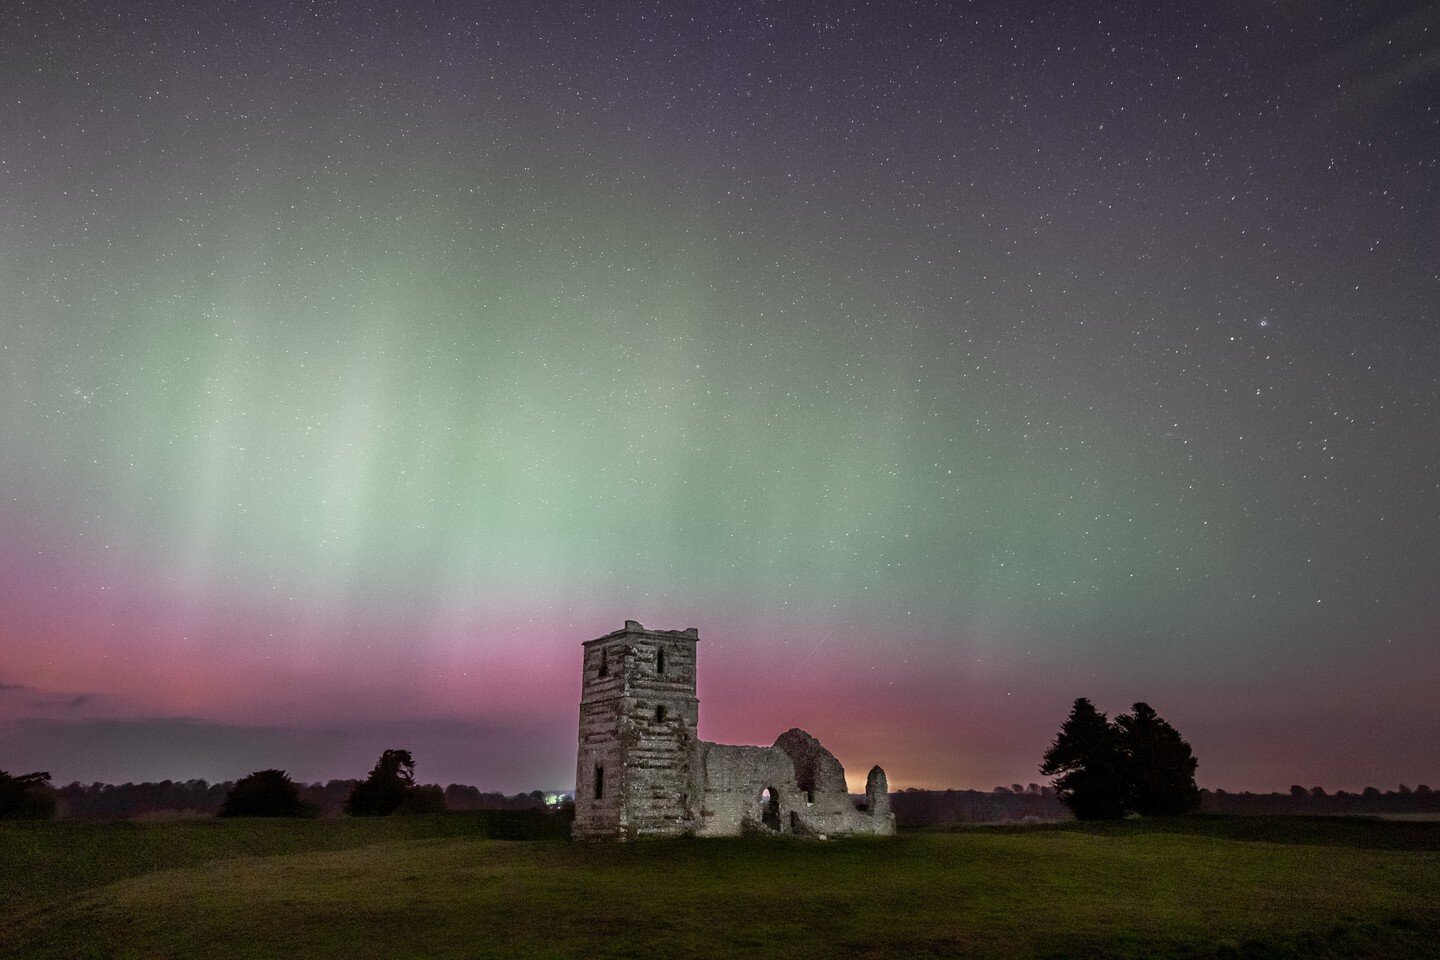 Earlier this month our owner and intrepid astrophotographer caught this incredibly rare sight of the Aurora Borealis, as far south as Dorset in the UK!👀 🌠 #photography #dorset #auroraborealis #astro #videography #northernlights